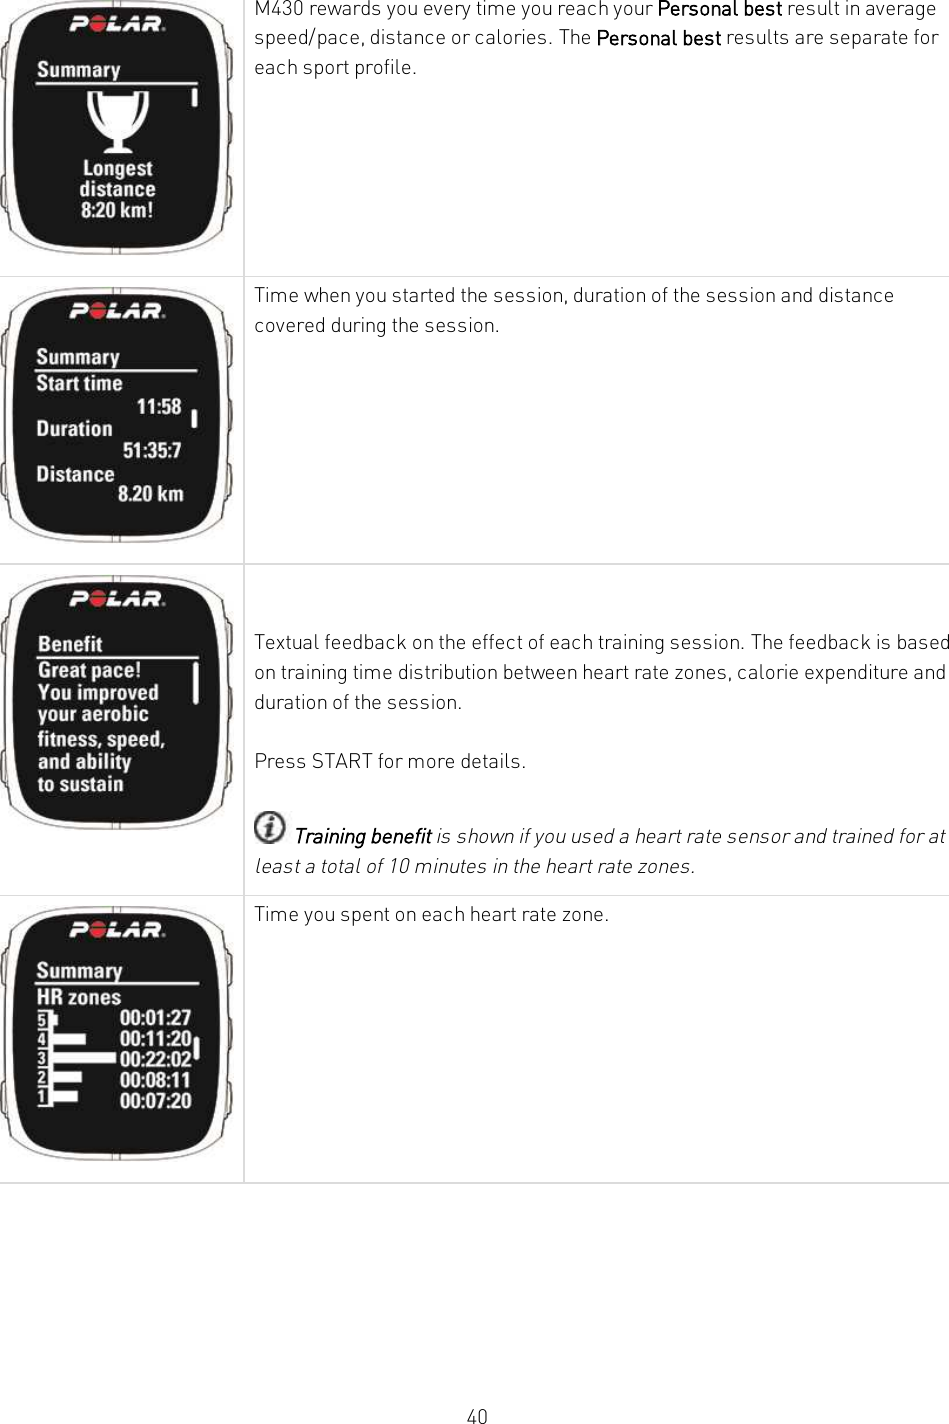 40M430 rewards you every time you reach your Personal best result in averagespeed/pace, distance or calories. The Personal best results are separate foreach sport profile.Time when you started the session, duration of the session and distancecovered during the session.Textual feedback on the effect of each training session. The feedback is basedon training time distribution between heart rate zones, calorie expenditure andduration of the session.Press START for more details.Training benefit is shown if you used a heart rate sensor and trained for atleast a total of 10 minutes in the heart rate zones.Time you spent on each heart rate zone.